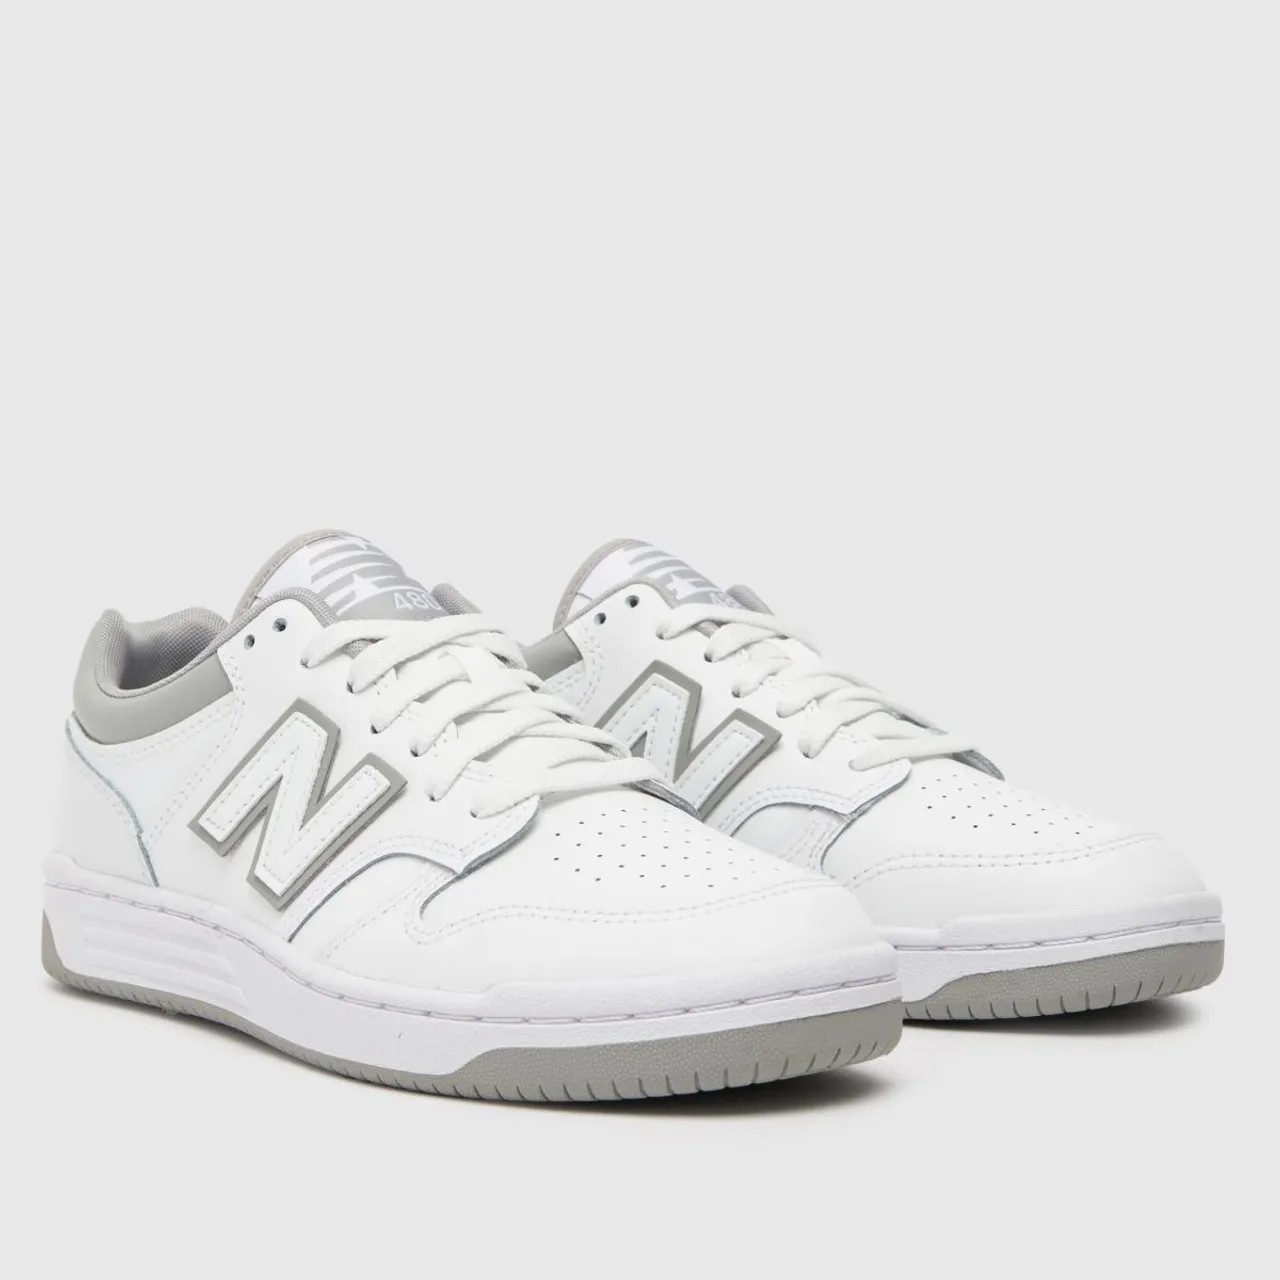 New Balance Nb 480 Trainers In White & Grey